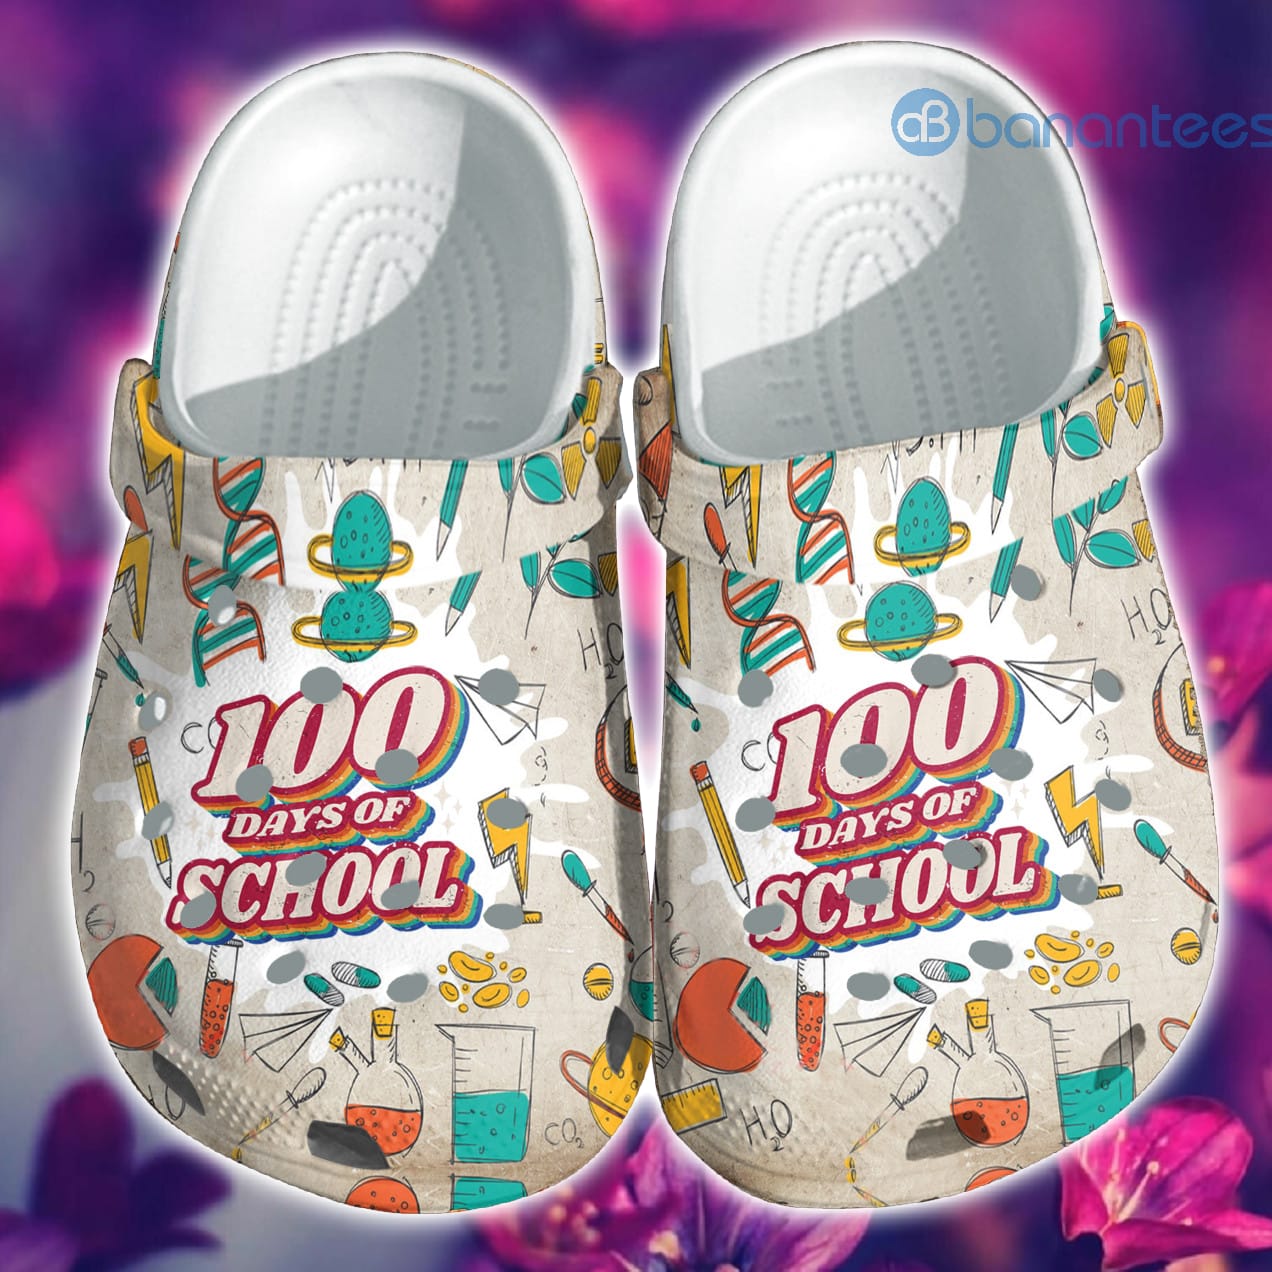 Thunder 100 Days Of Schoolleopard Clog Shoes For Men And Women